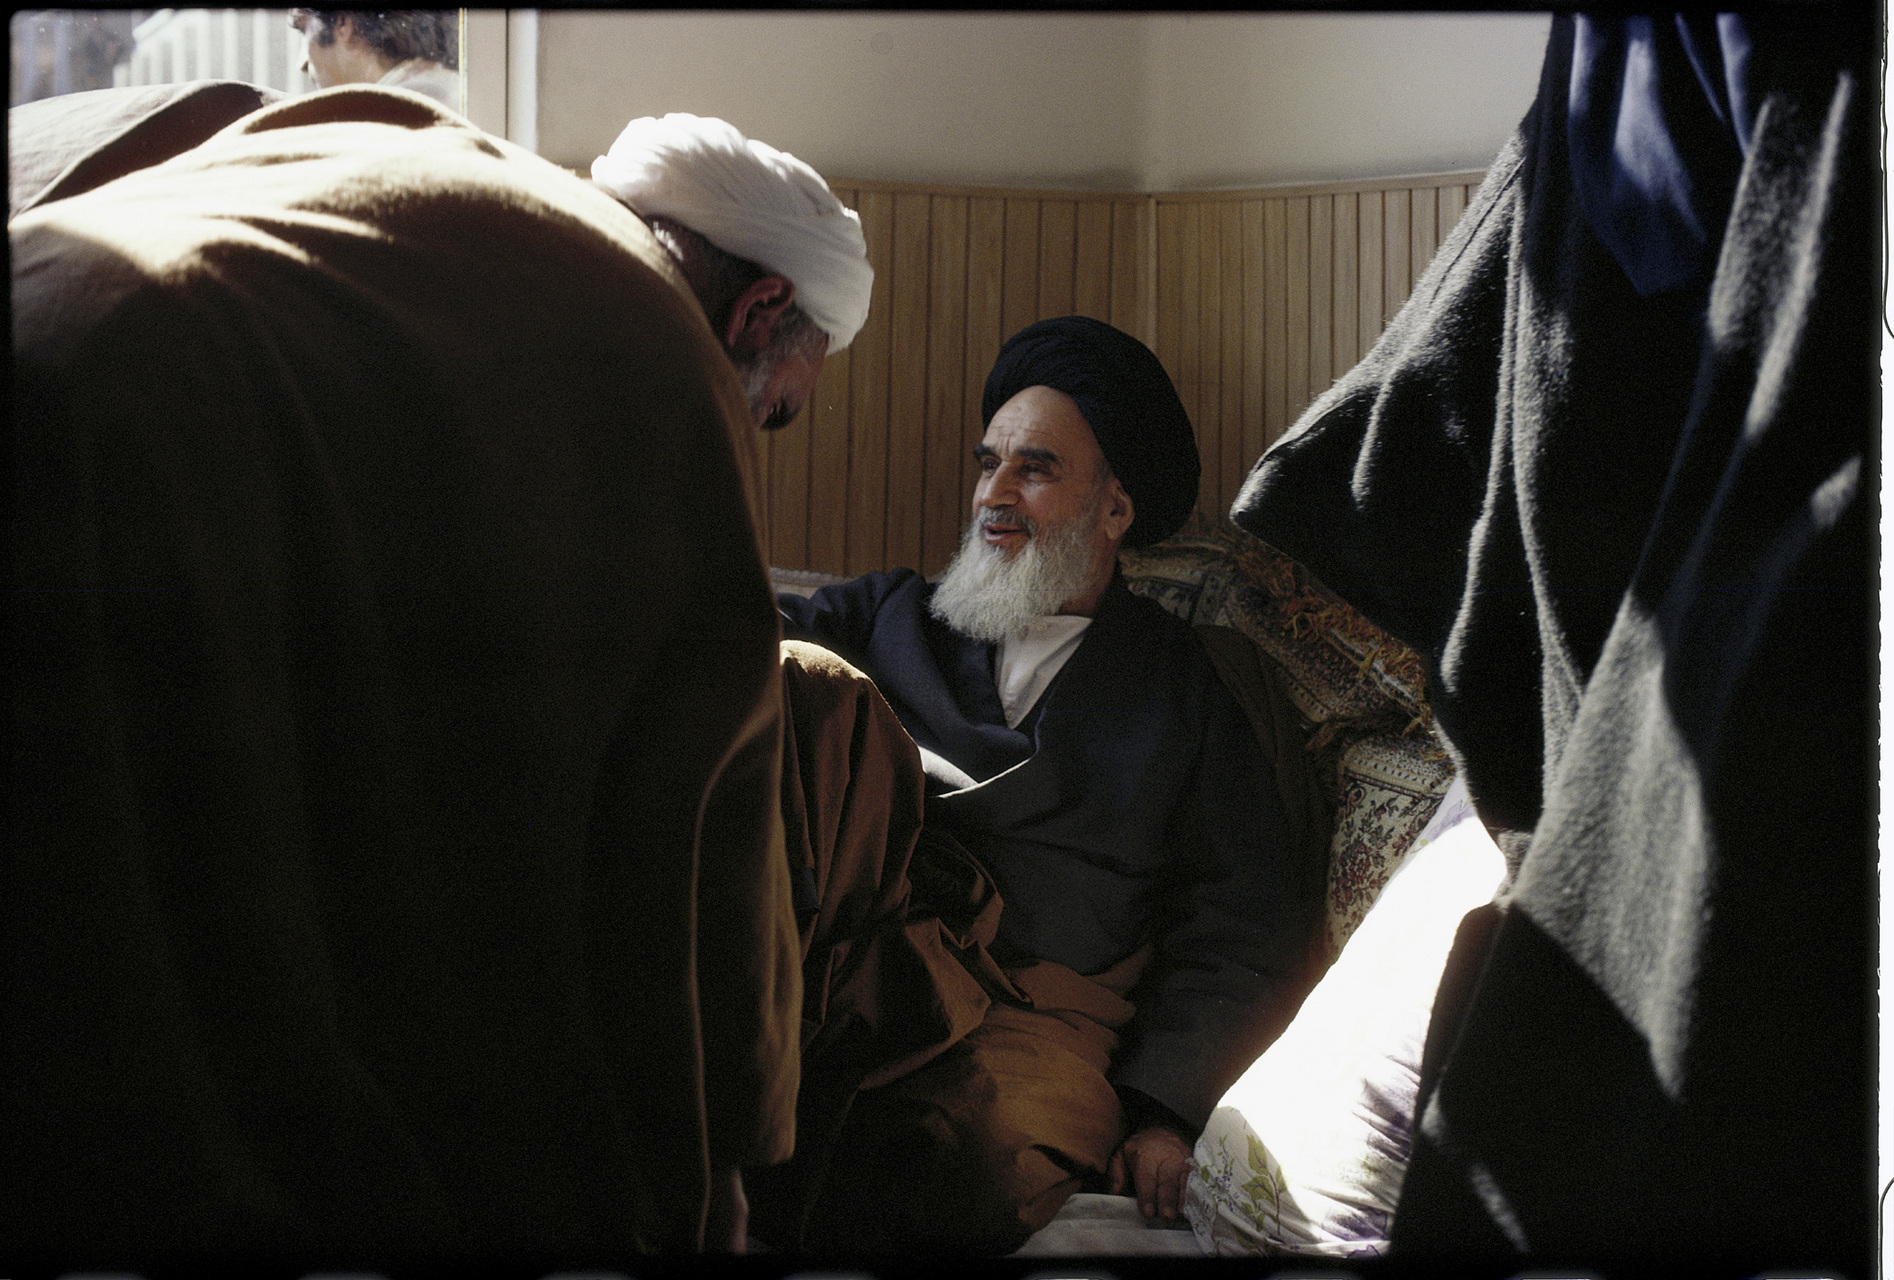 In the small school where he kept his offices after arriving in Tehran, Khomeini greets visitors. : 44 Days: the Iranian Revolution : David Burnett | Photographer